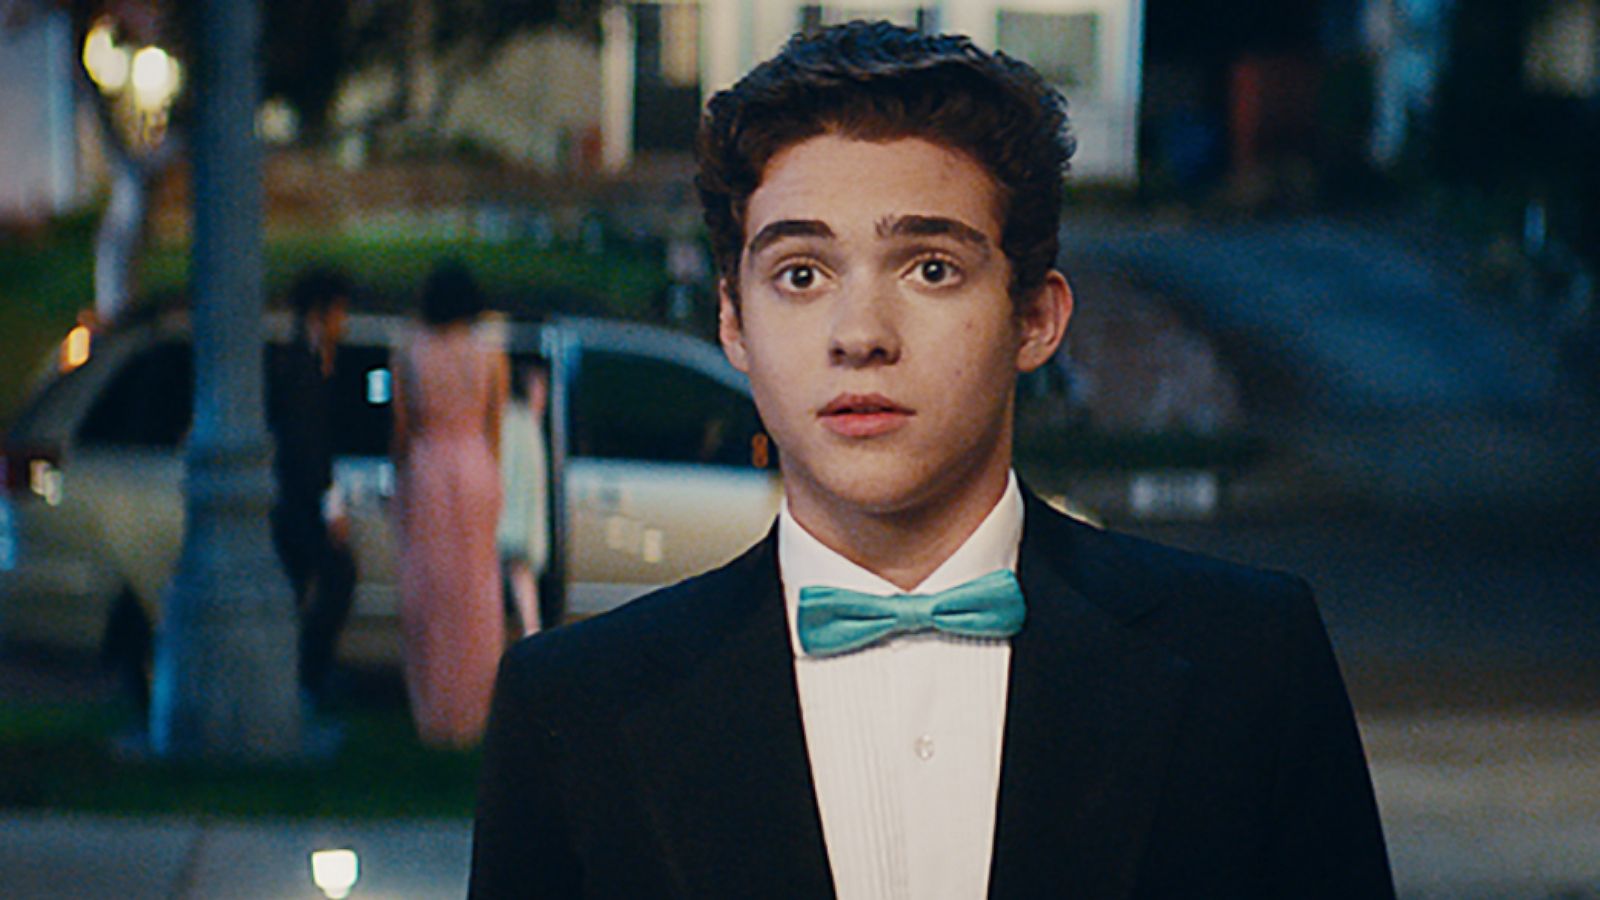 PHOTO: In Nest's 30-second Oscars spot, entitled "Prom Night," a teen boy, who is all heading to prom with his date, gets a reminder from dad to treat his date with respect.